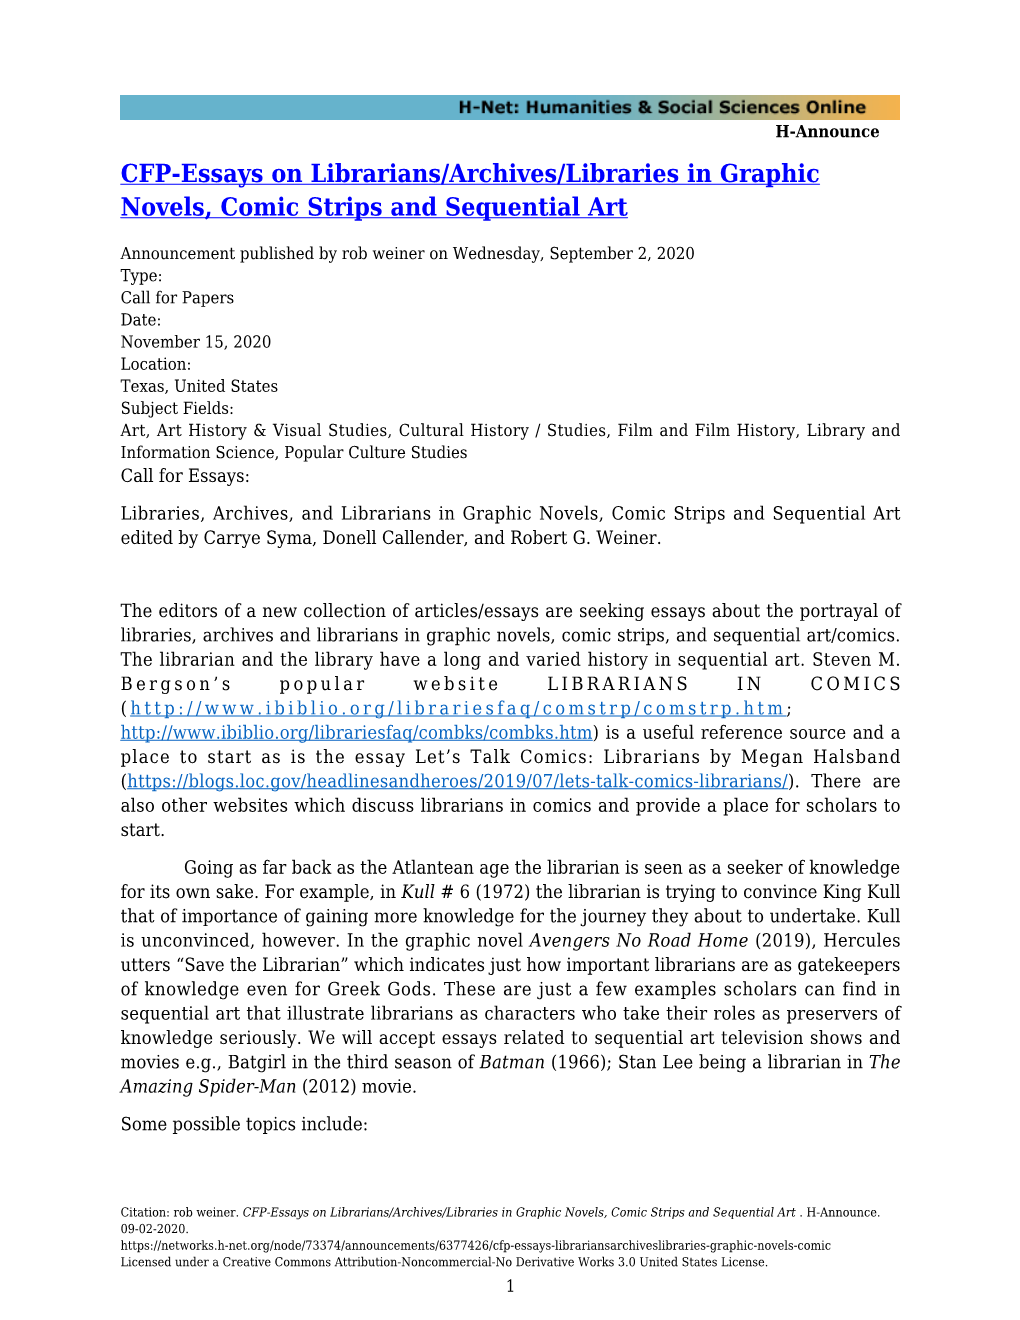 CFP-Essays on Librarians/Archives/Libraries in Graphic Novels, Comic Strips and Sequential Art